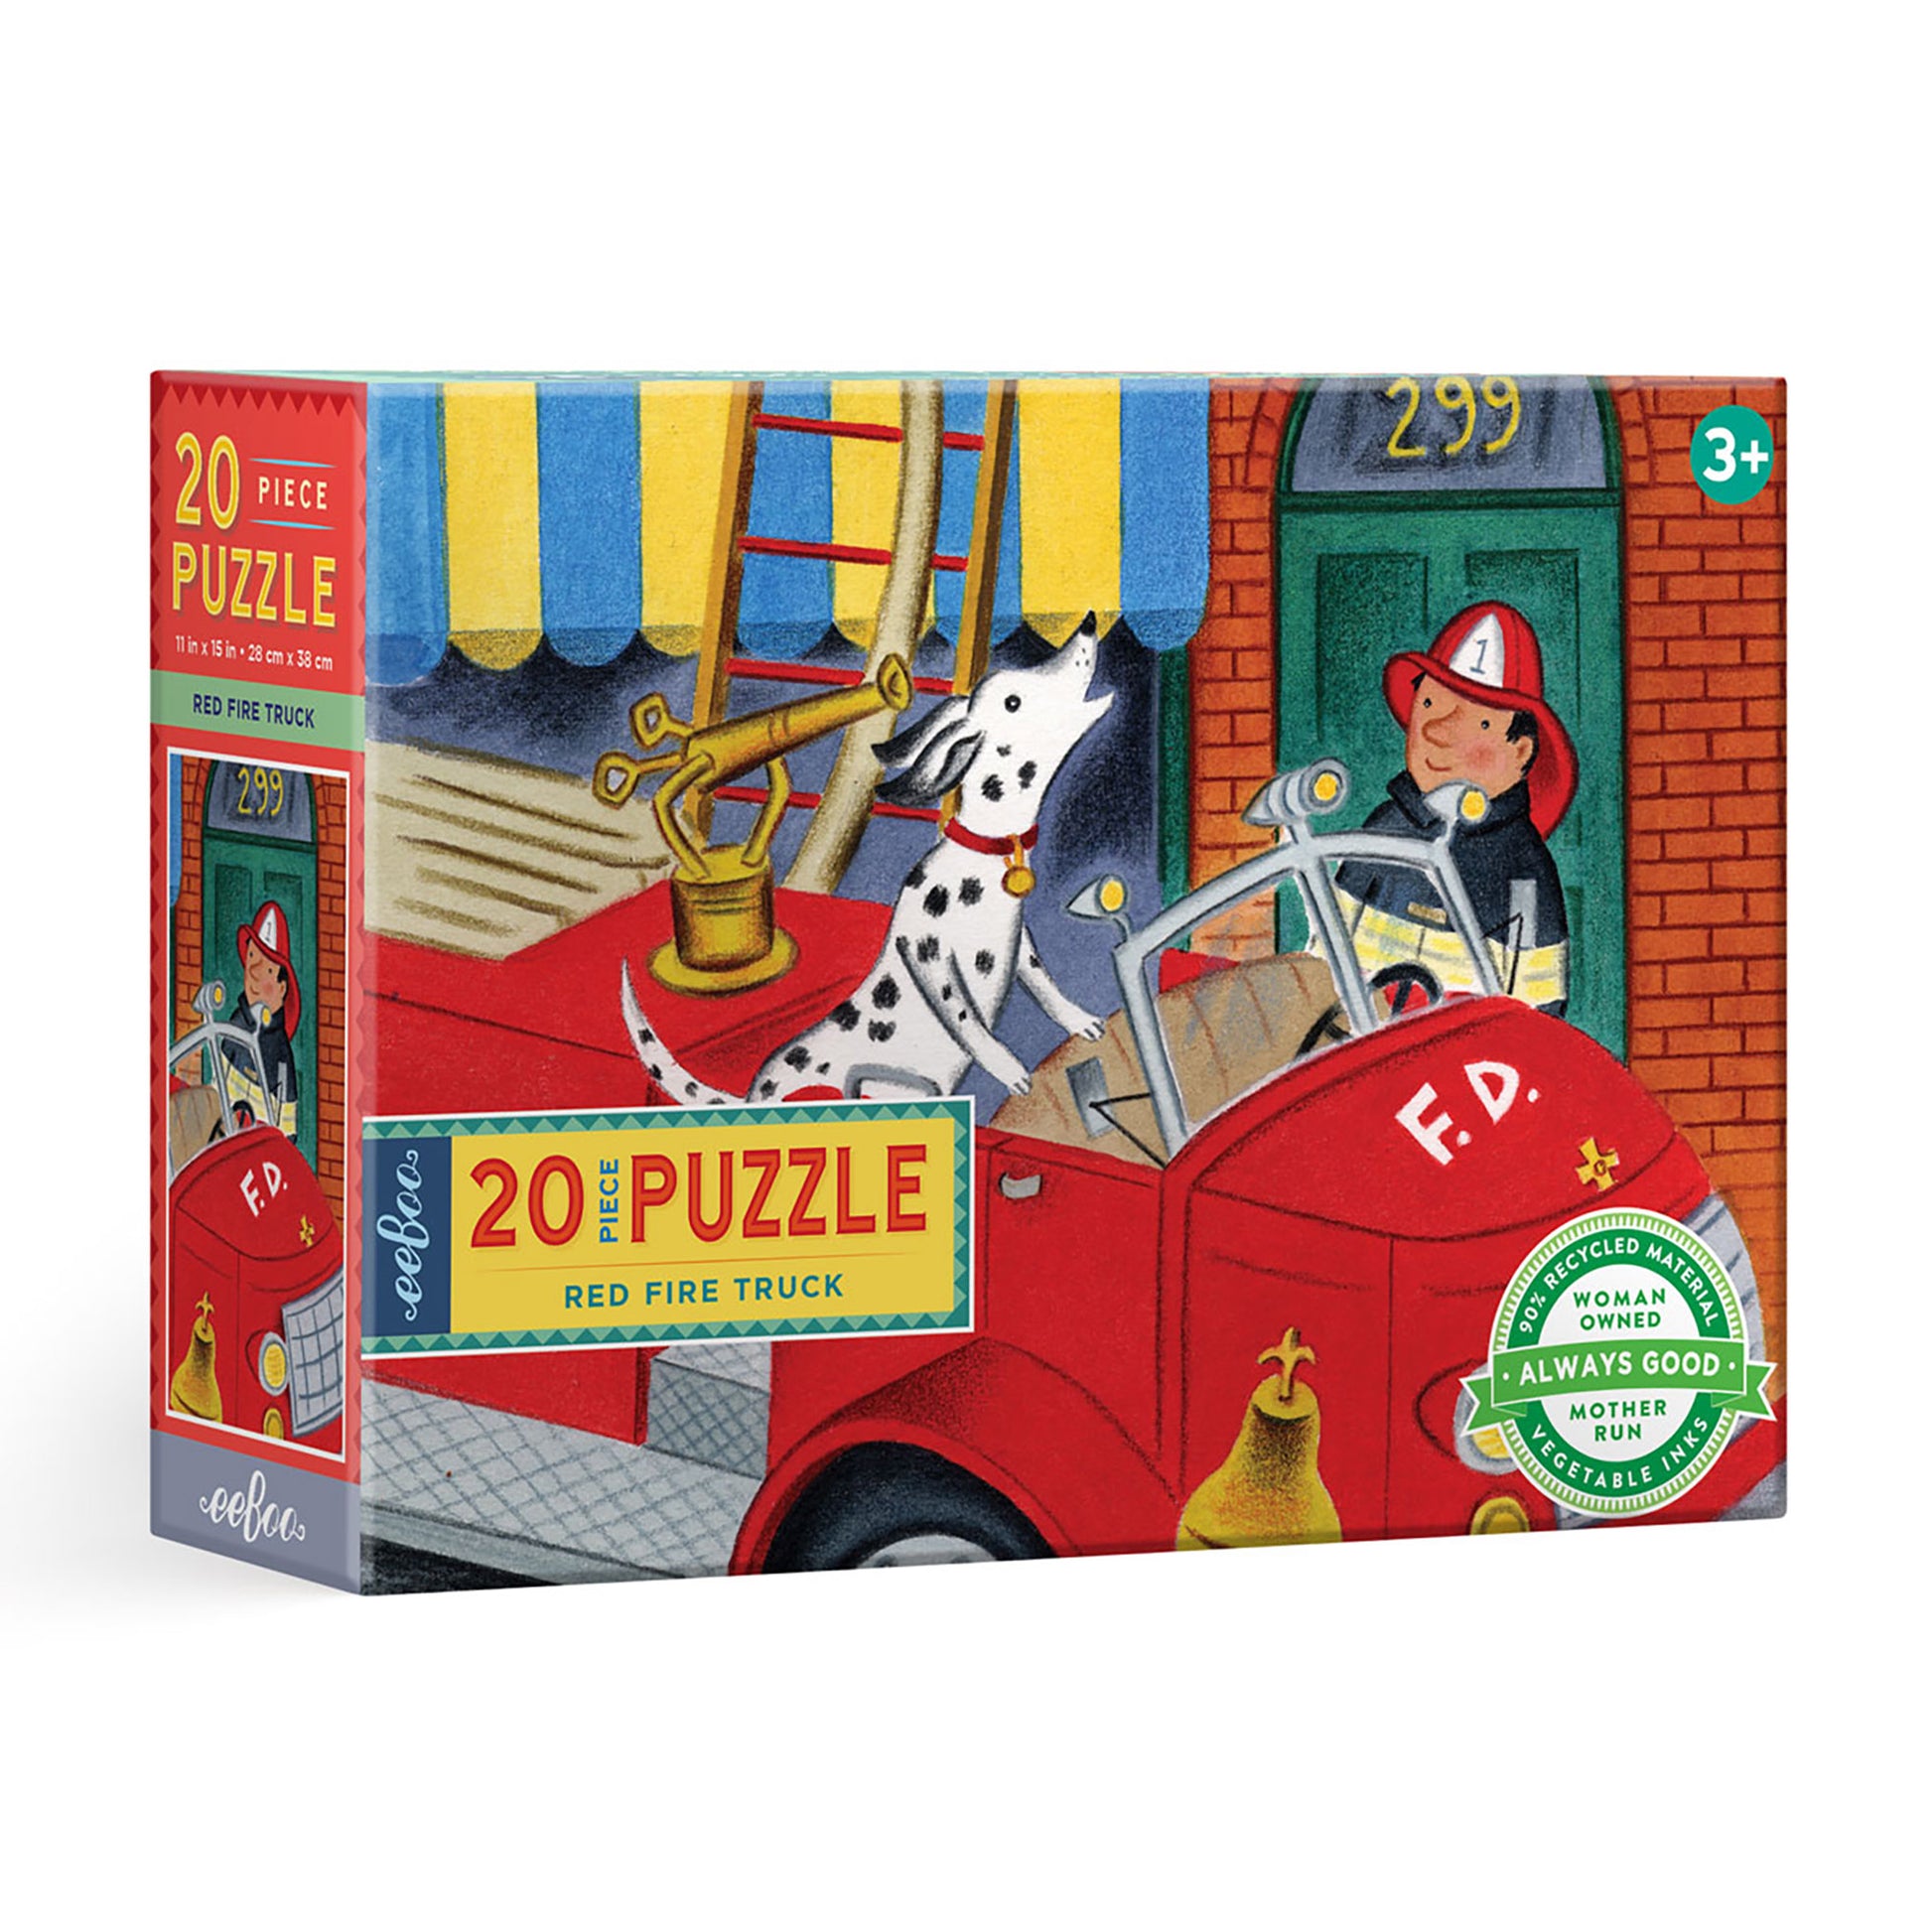 Red Fire Truck 20 Piece Big Puzzle eeBoo Unique Gifts for Kids Ages 3+